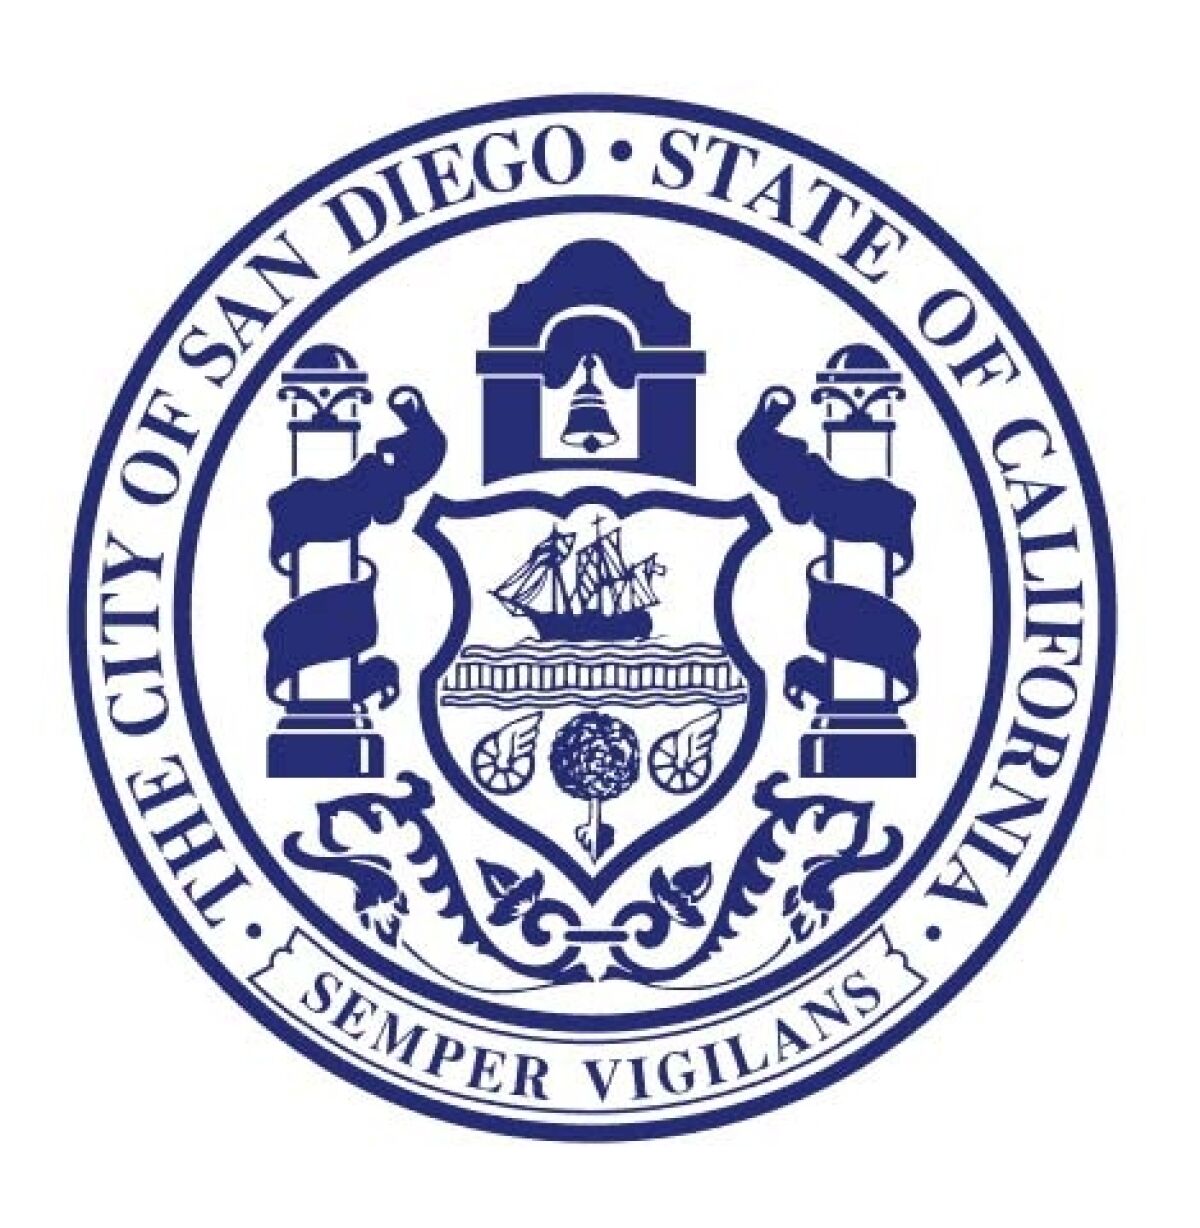 San Diego City Councilman Joe LaCava of District 1, which includes La Jolla, wants the city seal changed.